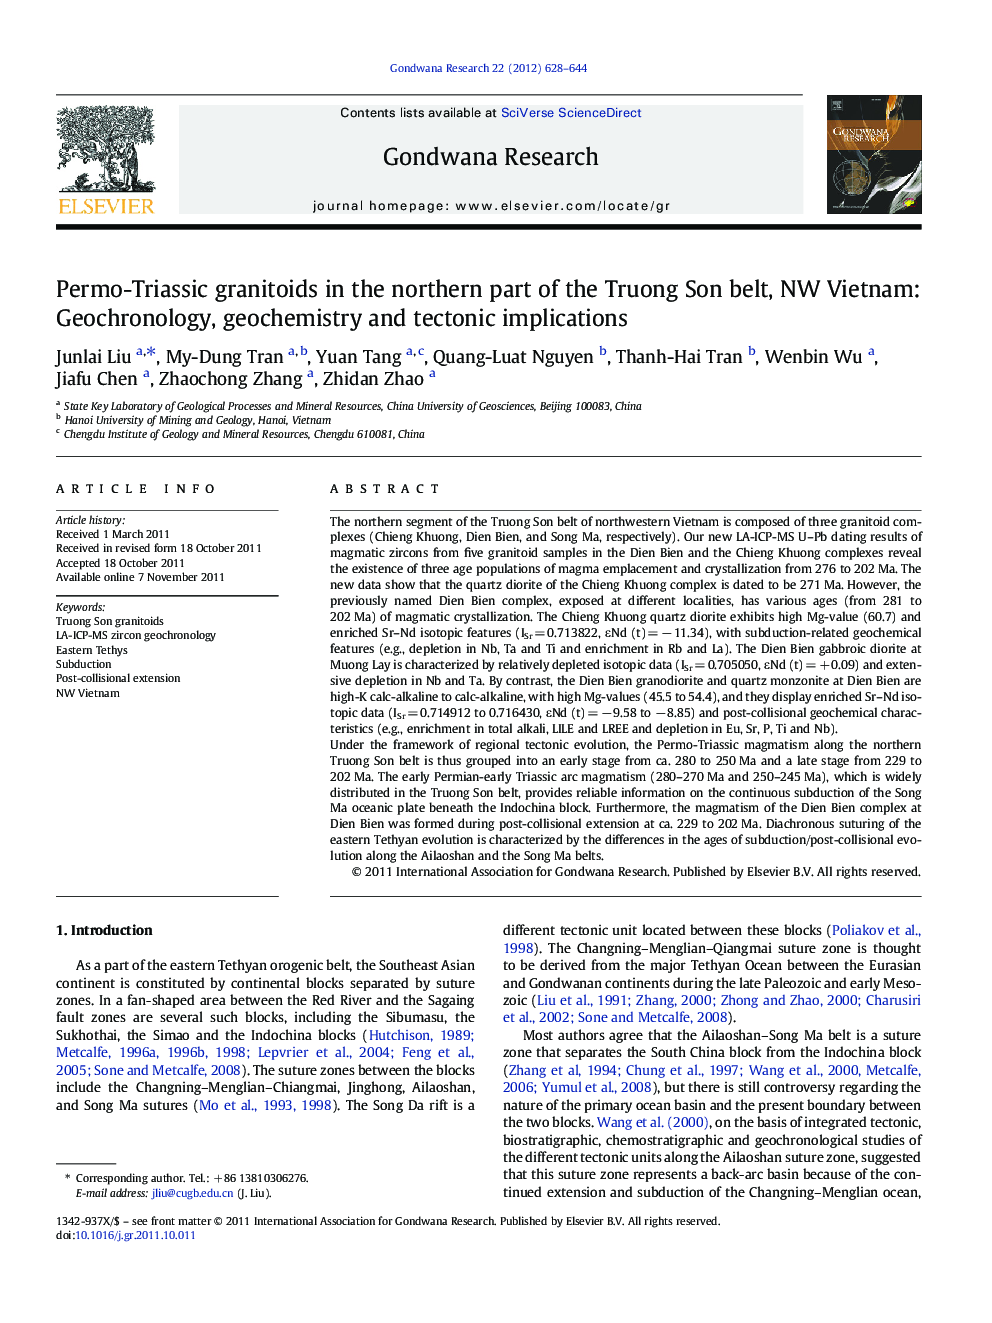 Permo-Triassic granitoids in the northern part of the Truong Son belt, NW Vietnam: Geochronology, geochemistry and tectonic implications